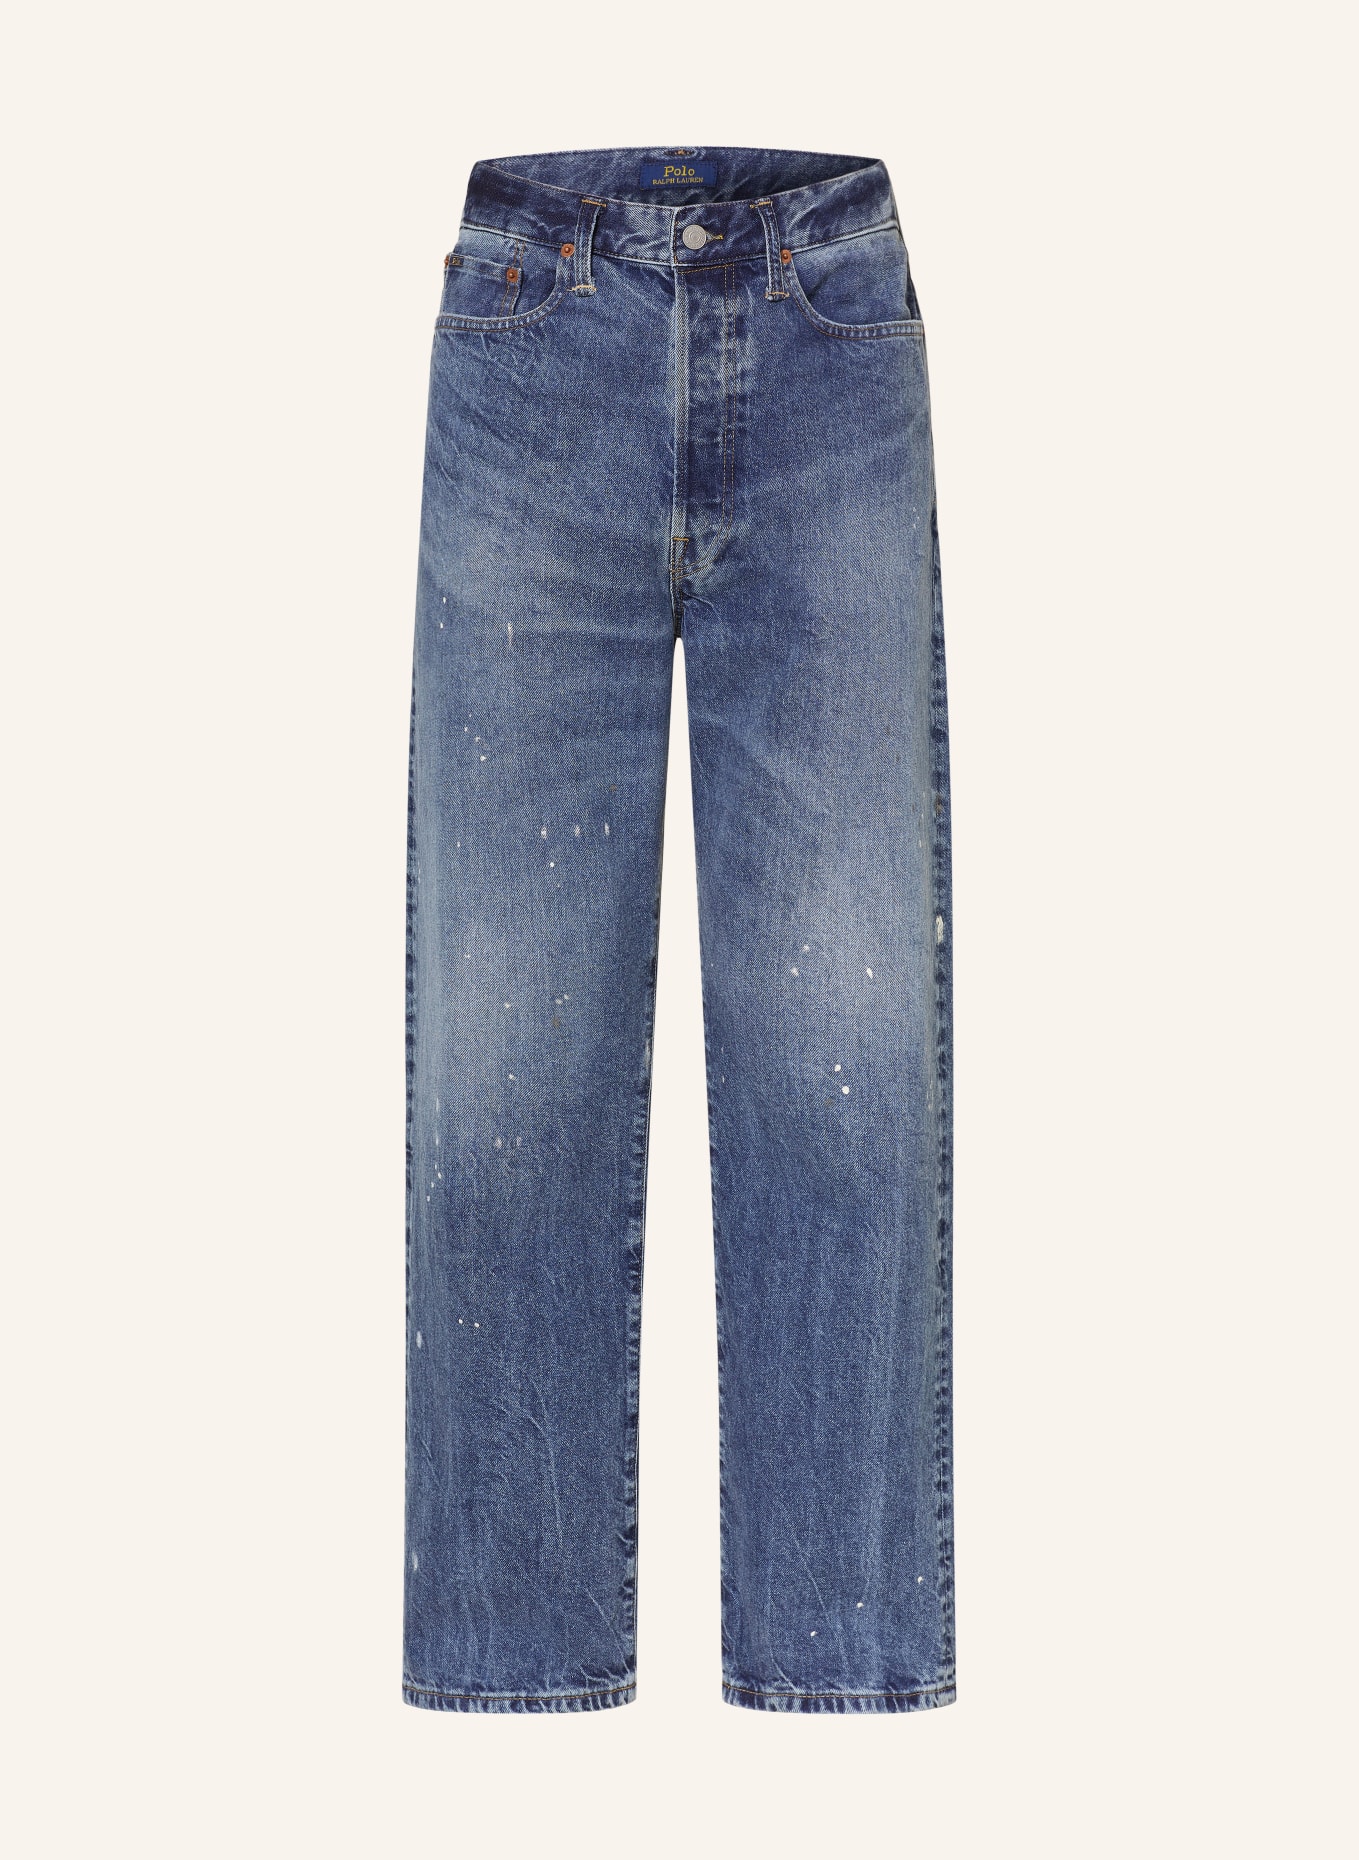 POLO RALPH LAUREN Jeans THE VINTAGE Classic Fit, Farbe: 001 WATERBURY (Bild 1)